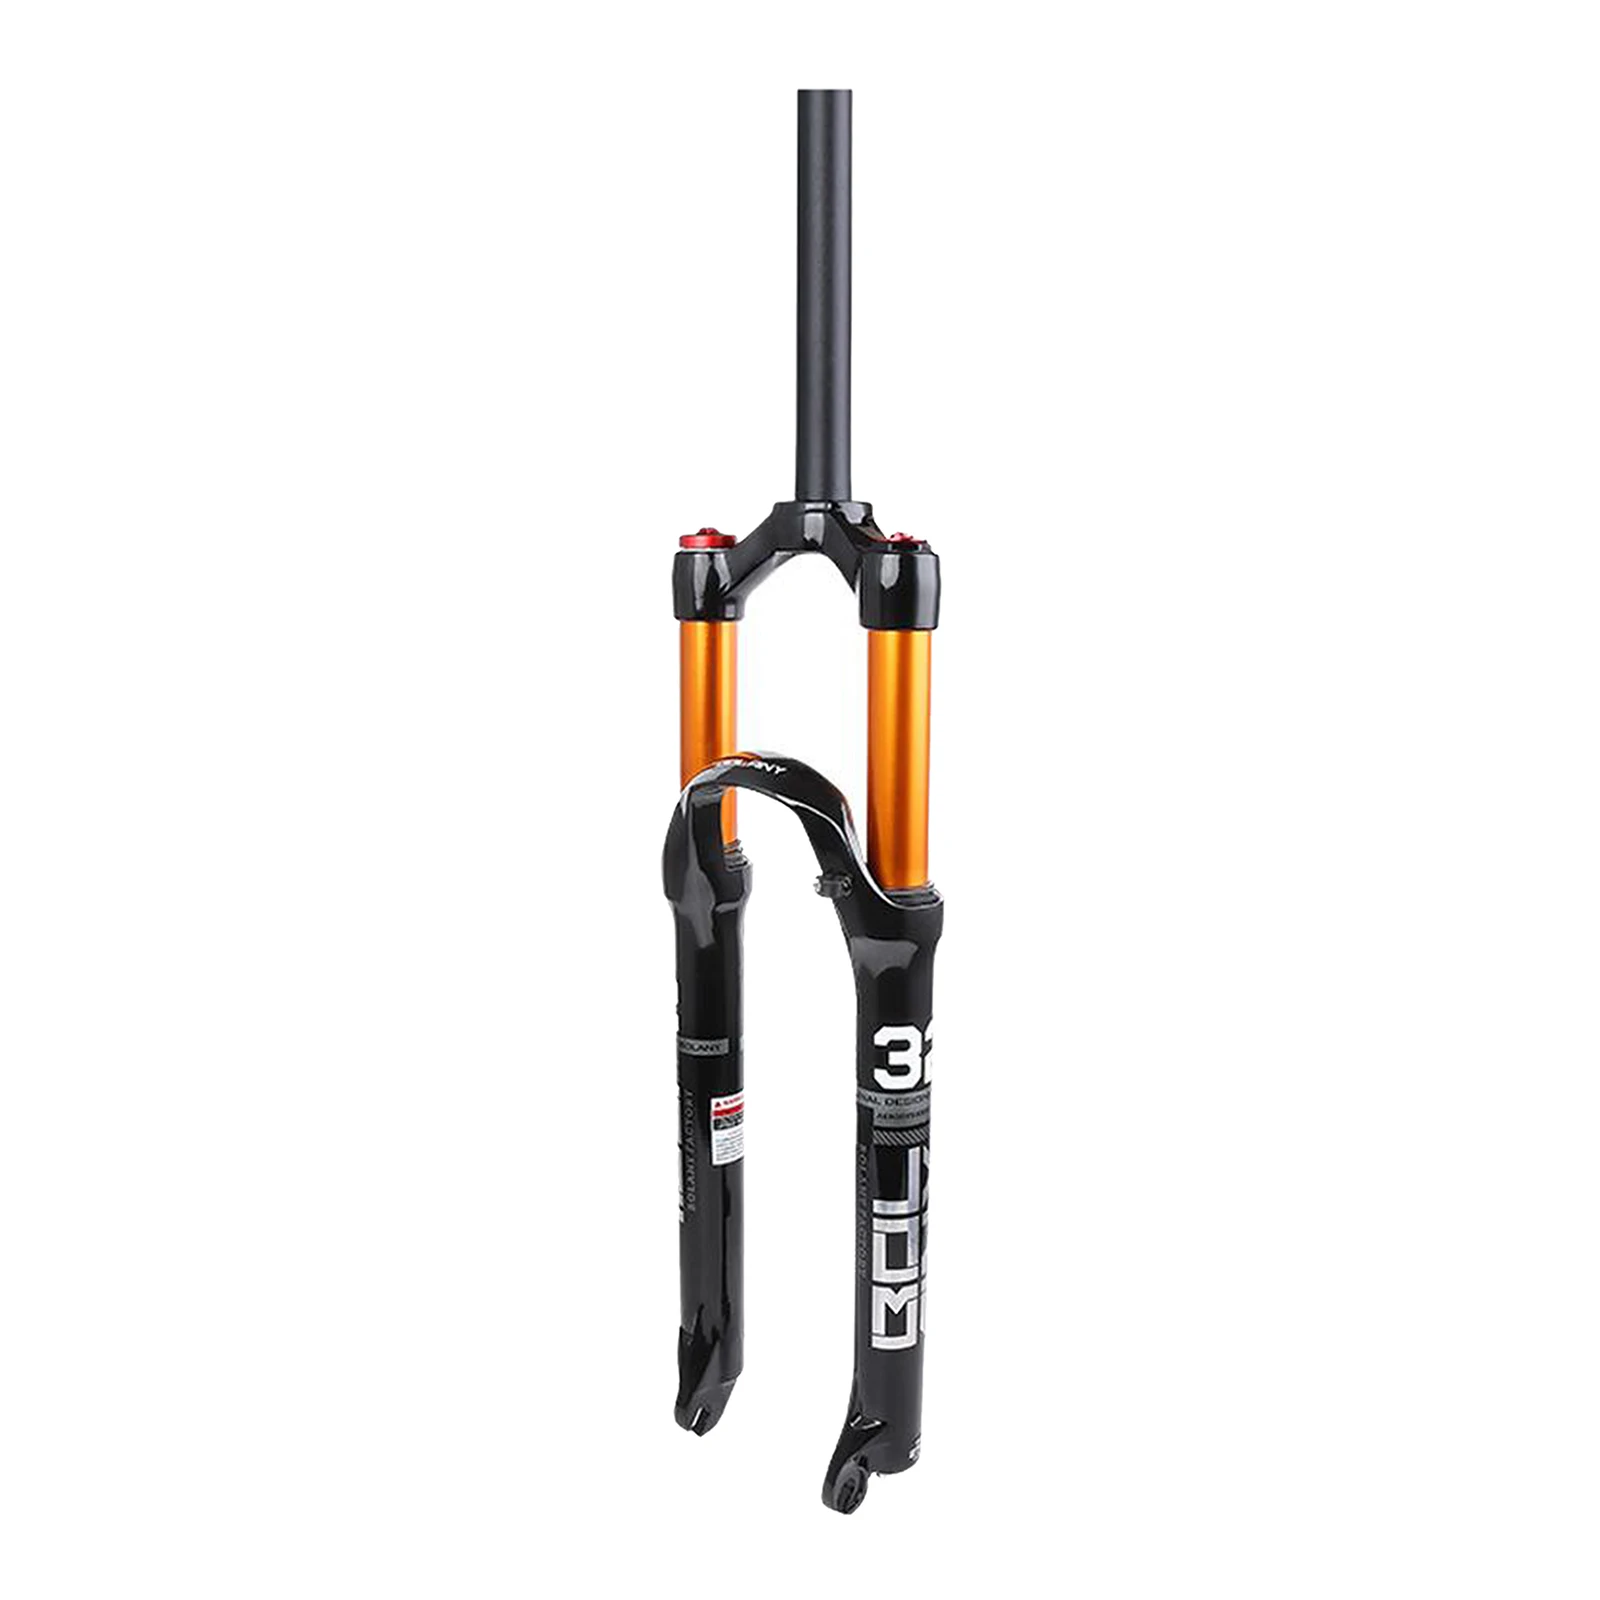 Deluxe Bike Bike  Fork 26 inch 27.5 inch 29 inch Manual Lock Lockout Bicycle Shockproof Front Fork with Cable Clip